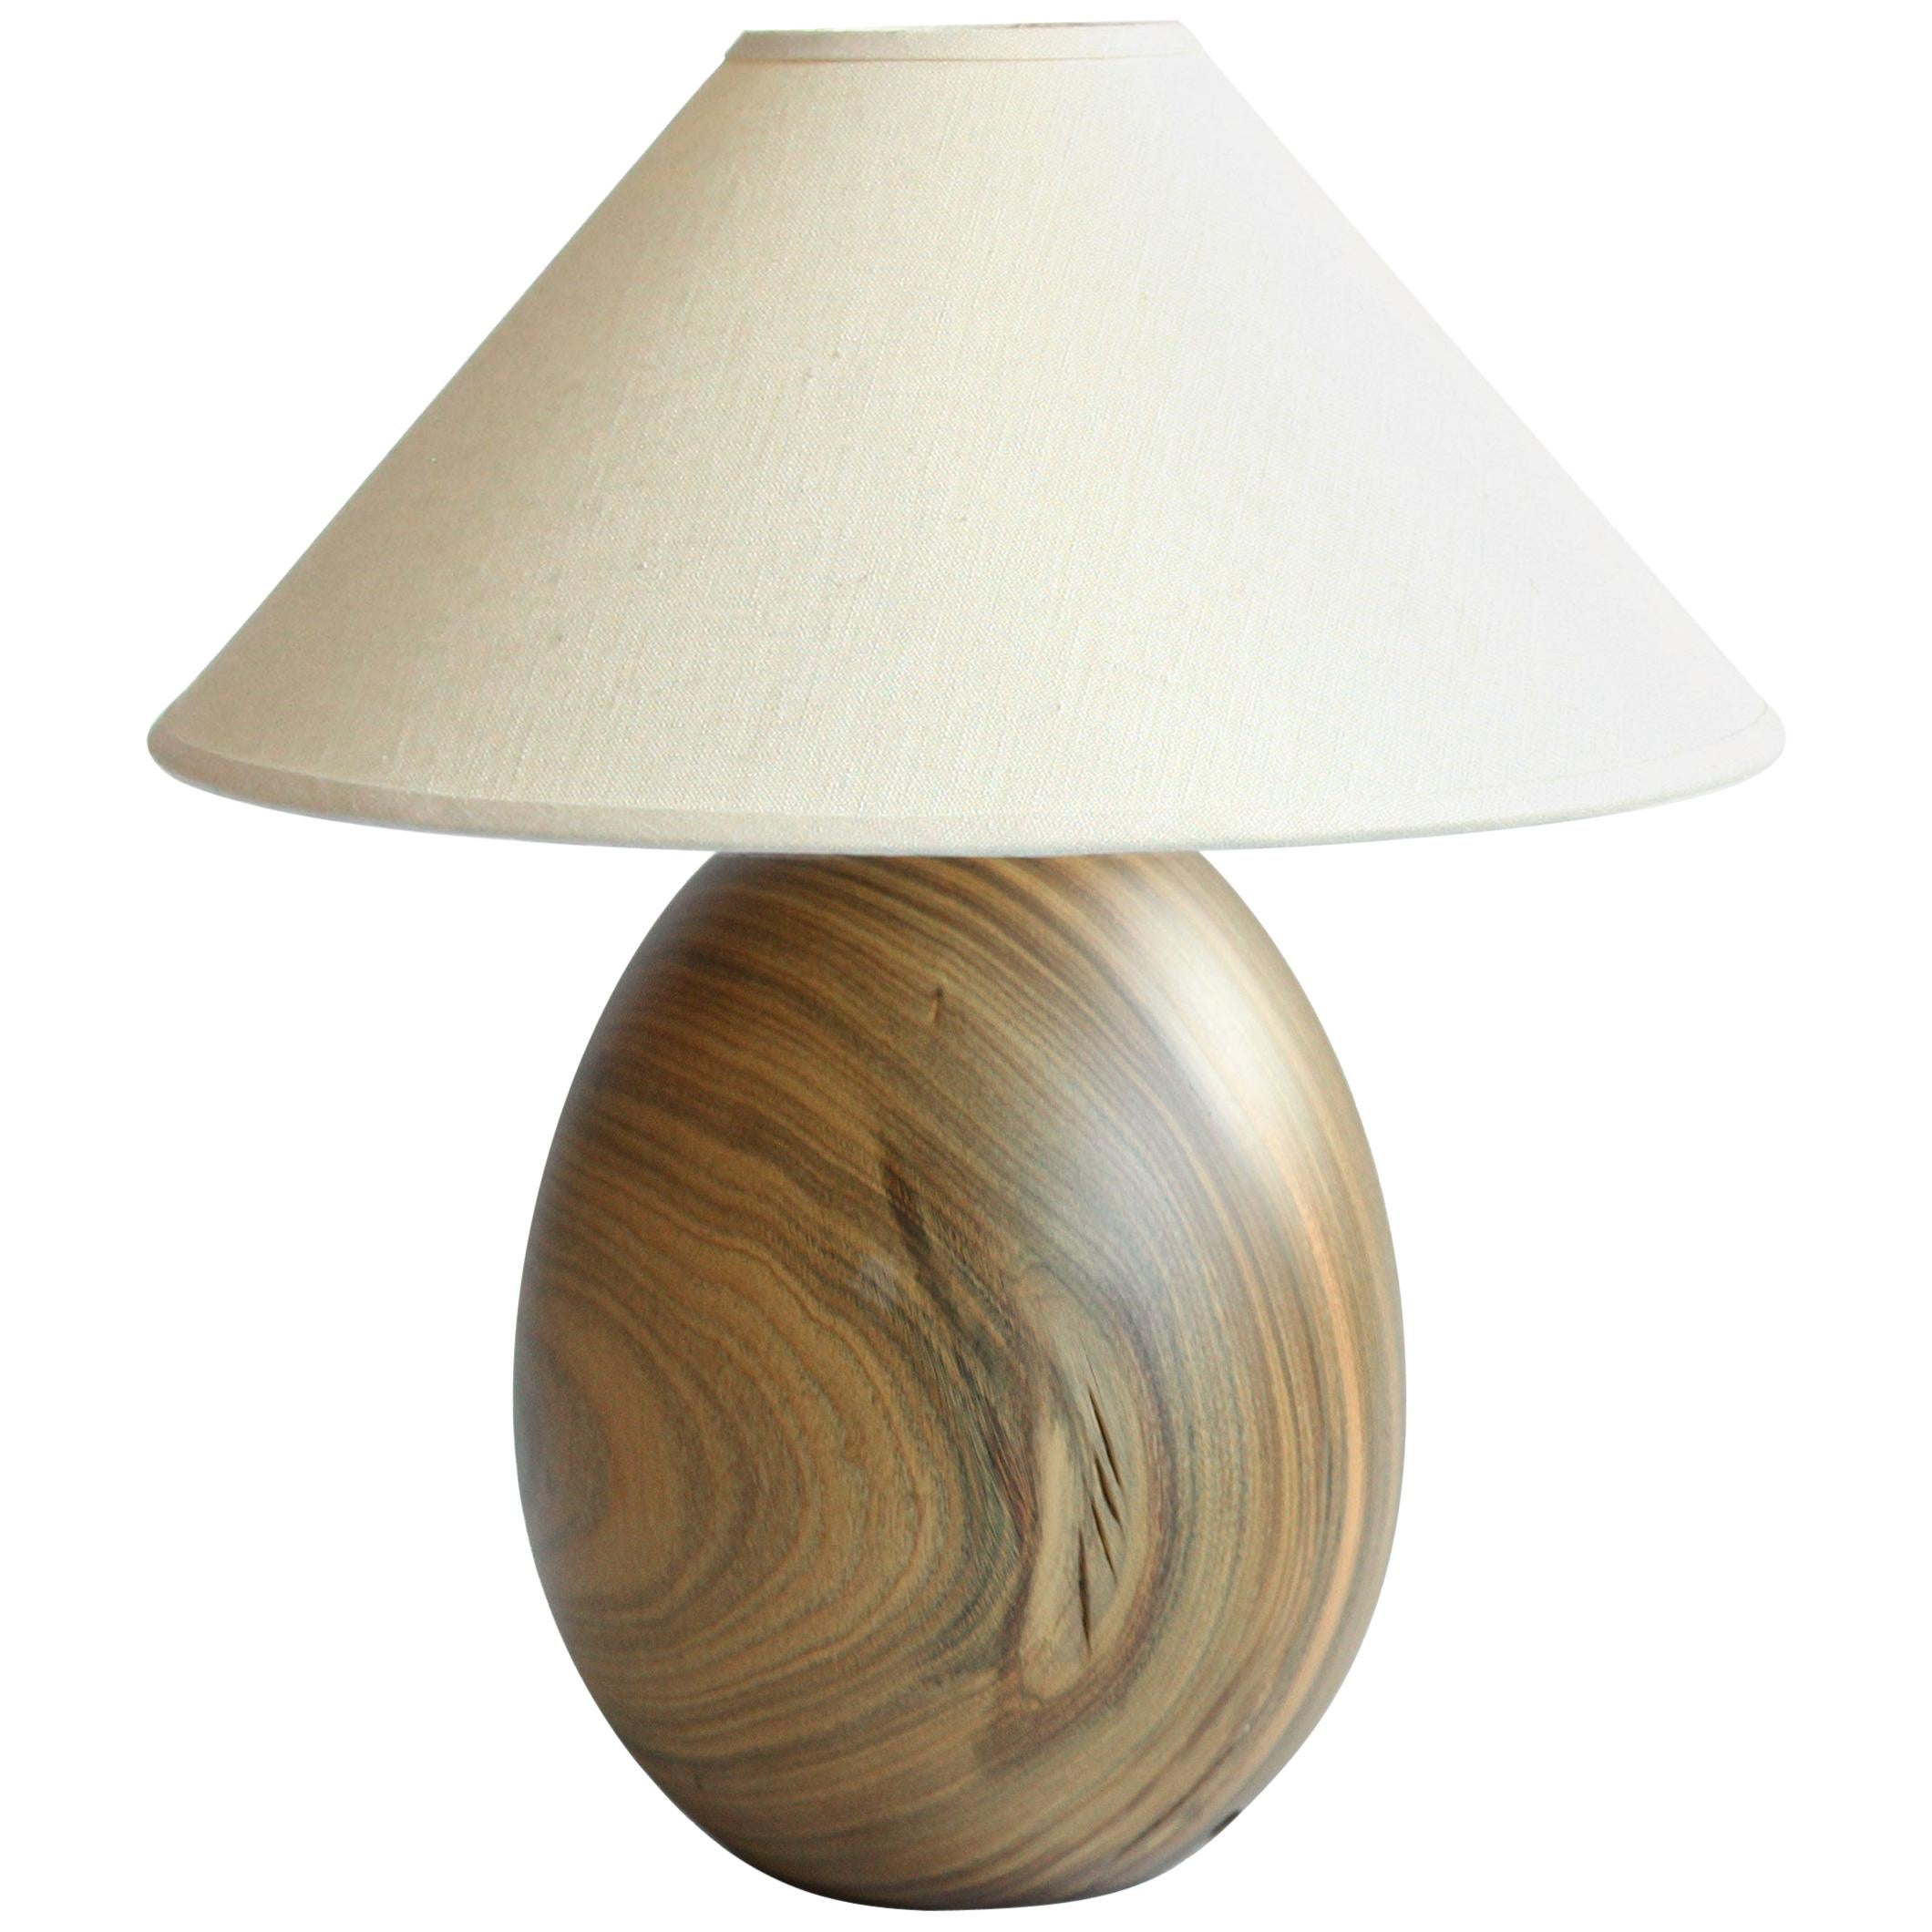 Tropical Hardwood Lamp and White Linen Shade, Small Medium, Árbol Collection, 23